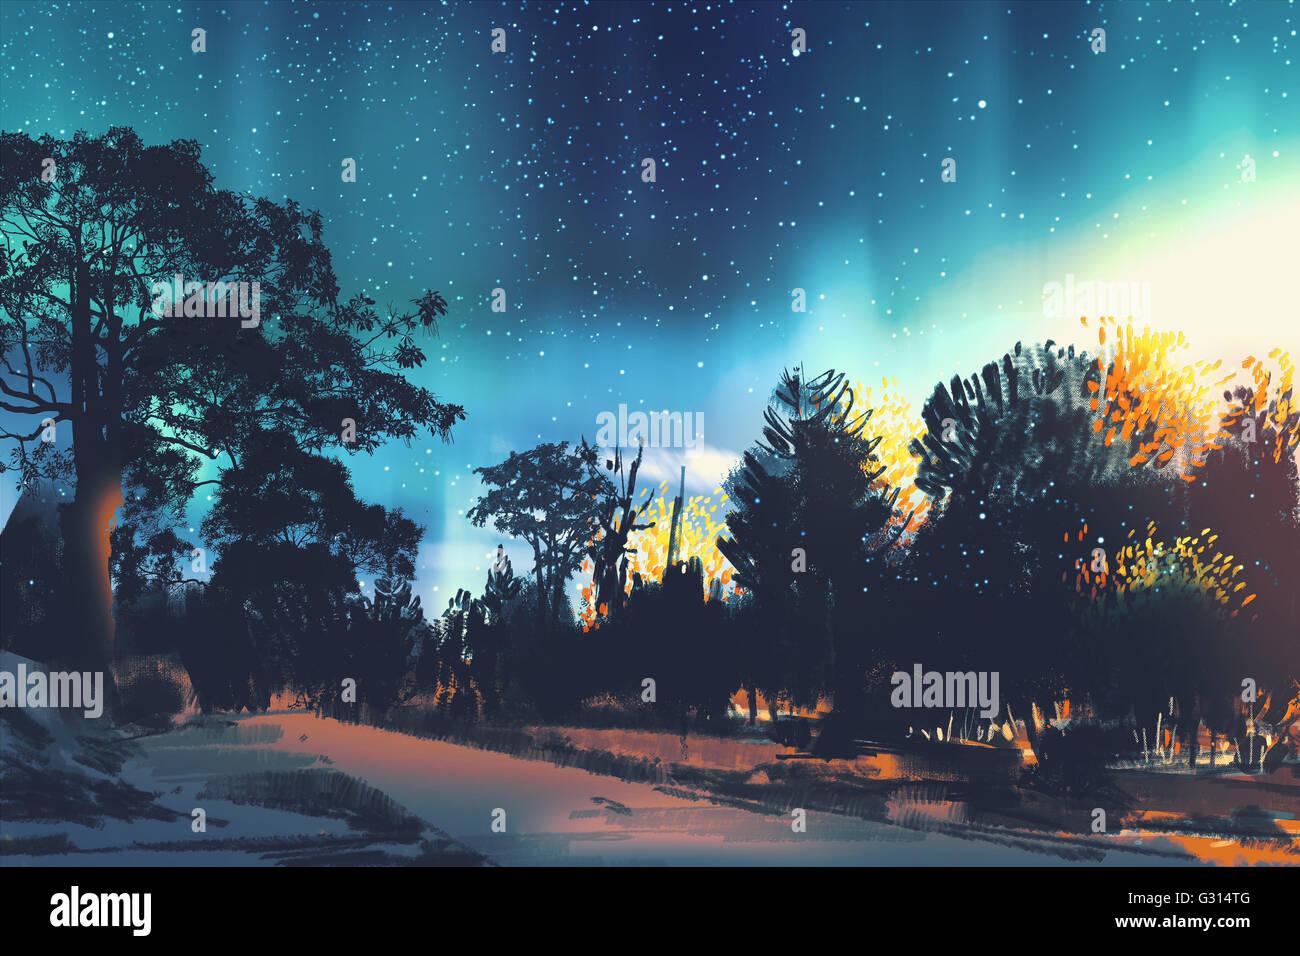 star field above the trees in forest,night scenery,illustration Stock Photo